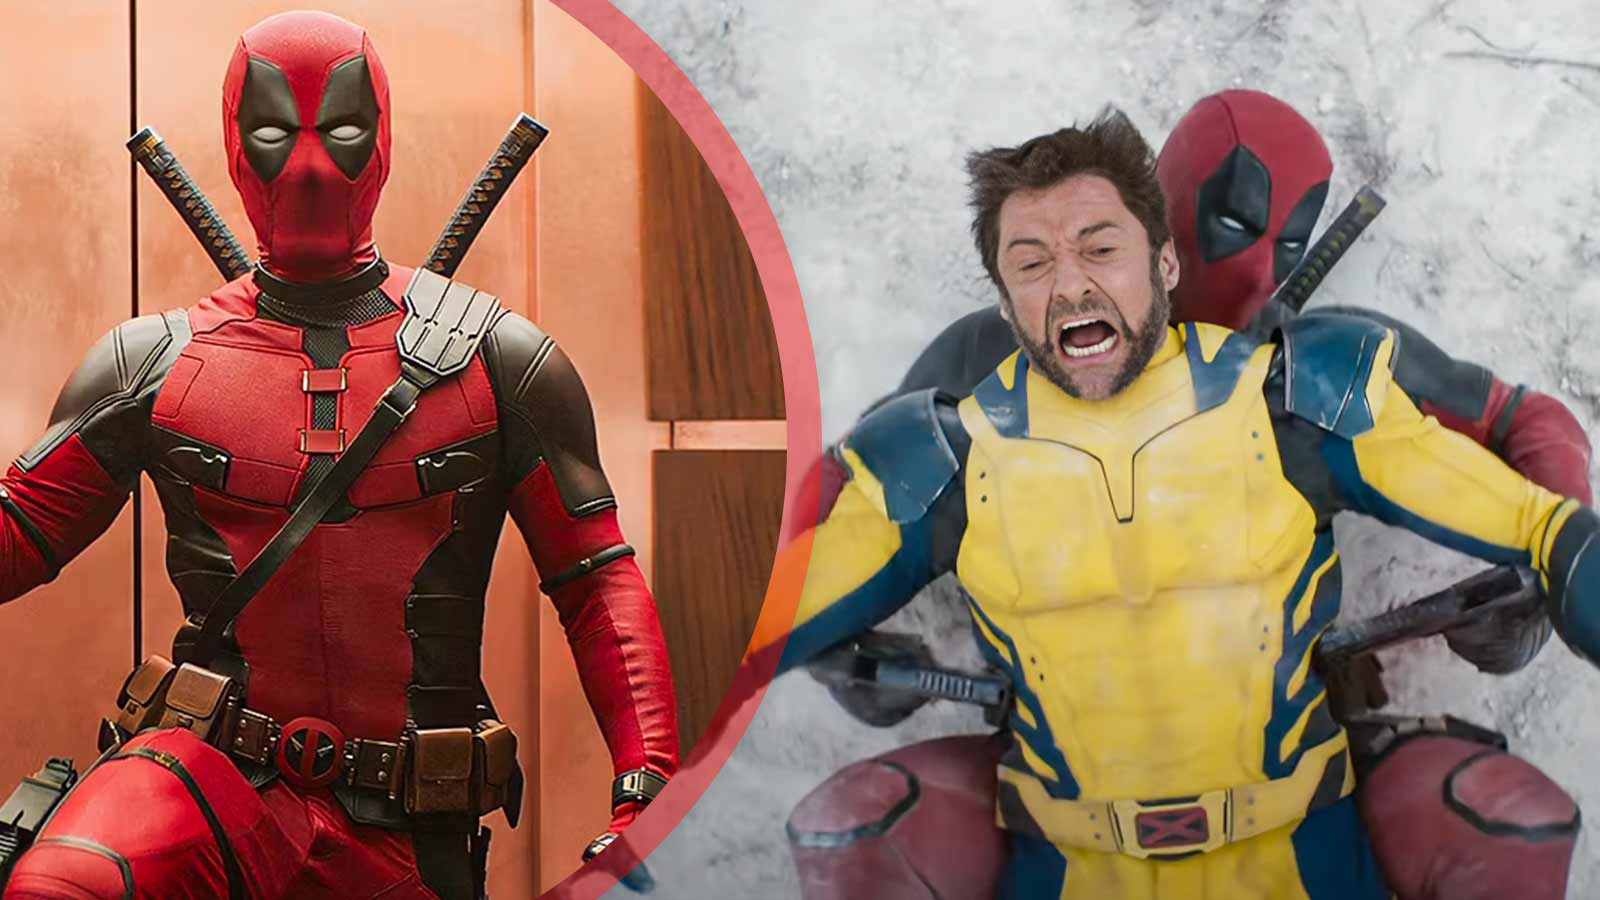 “It looks insane”: ‘Deadpool & Wolverine’ Could Potentially Break All Marvel Records as Insider Makes Wild Claim About Ryan Reynolds’ Trilogy Film